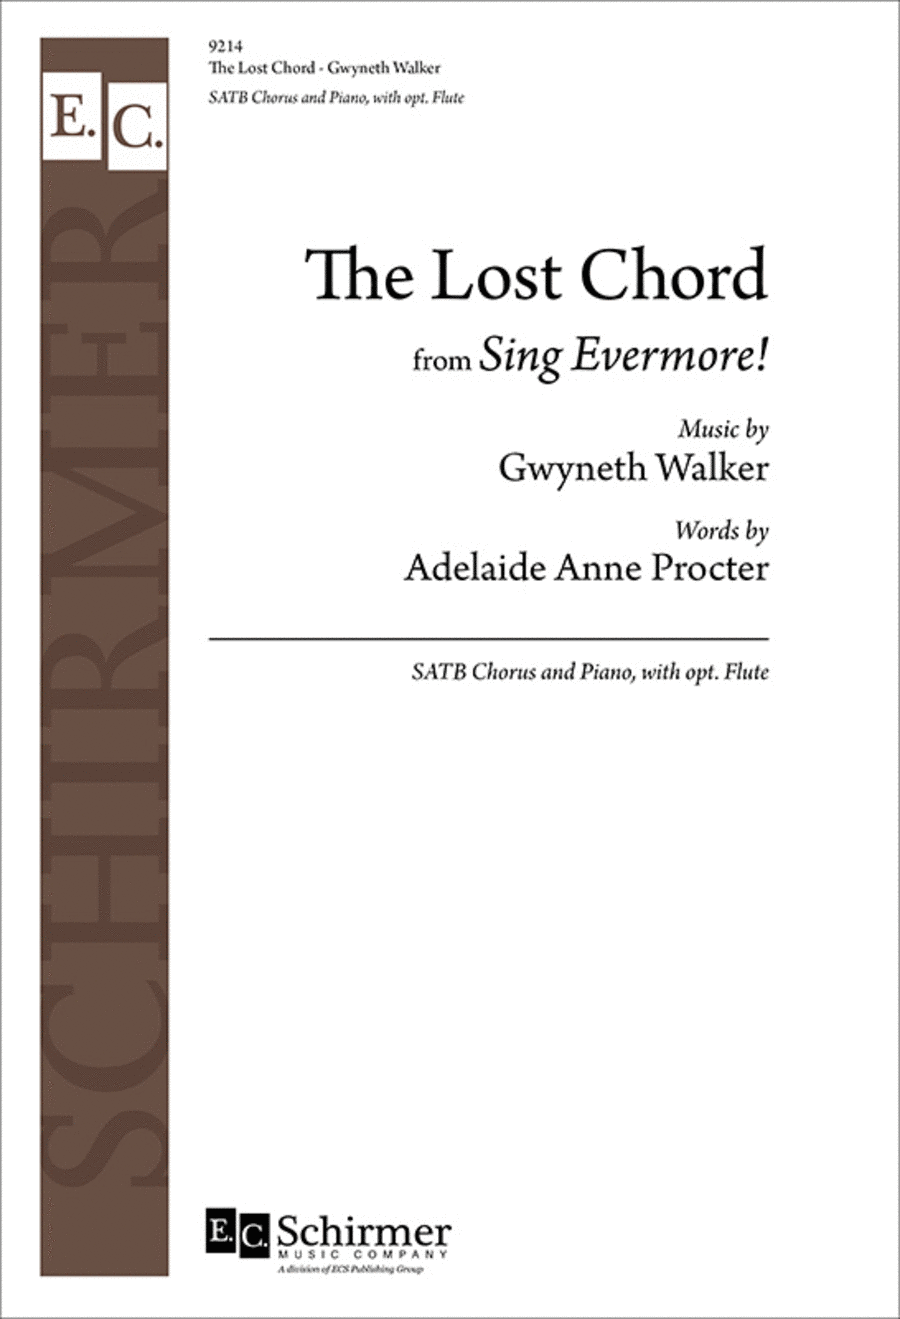 The Lost Chord from Sing Evermore!